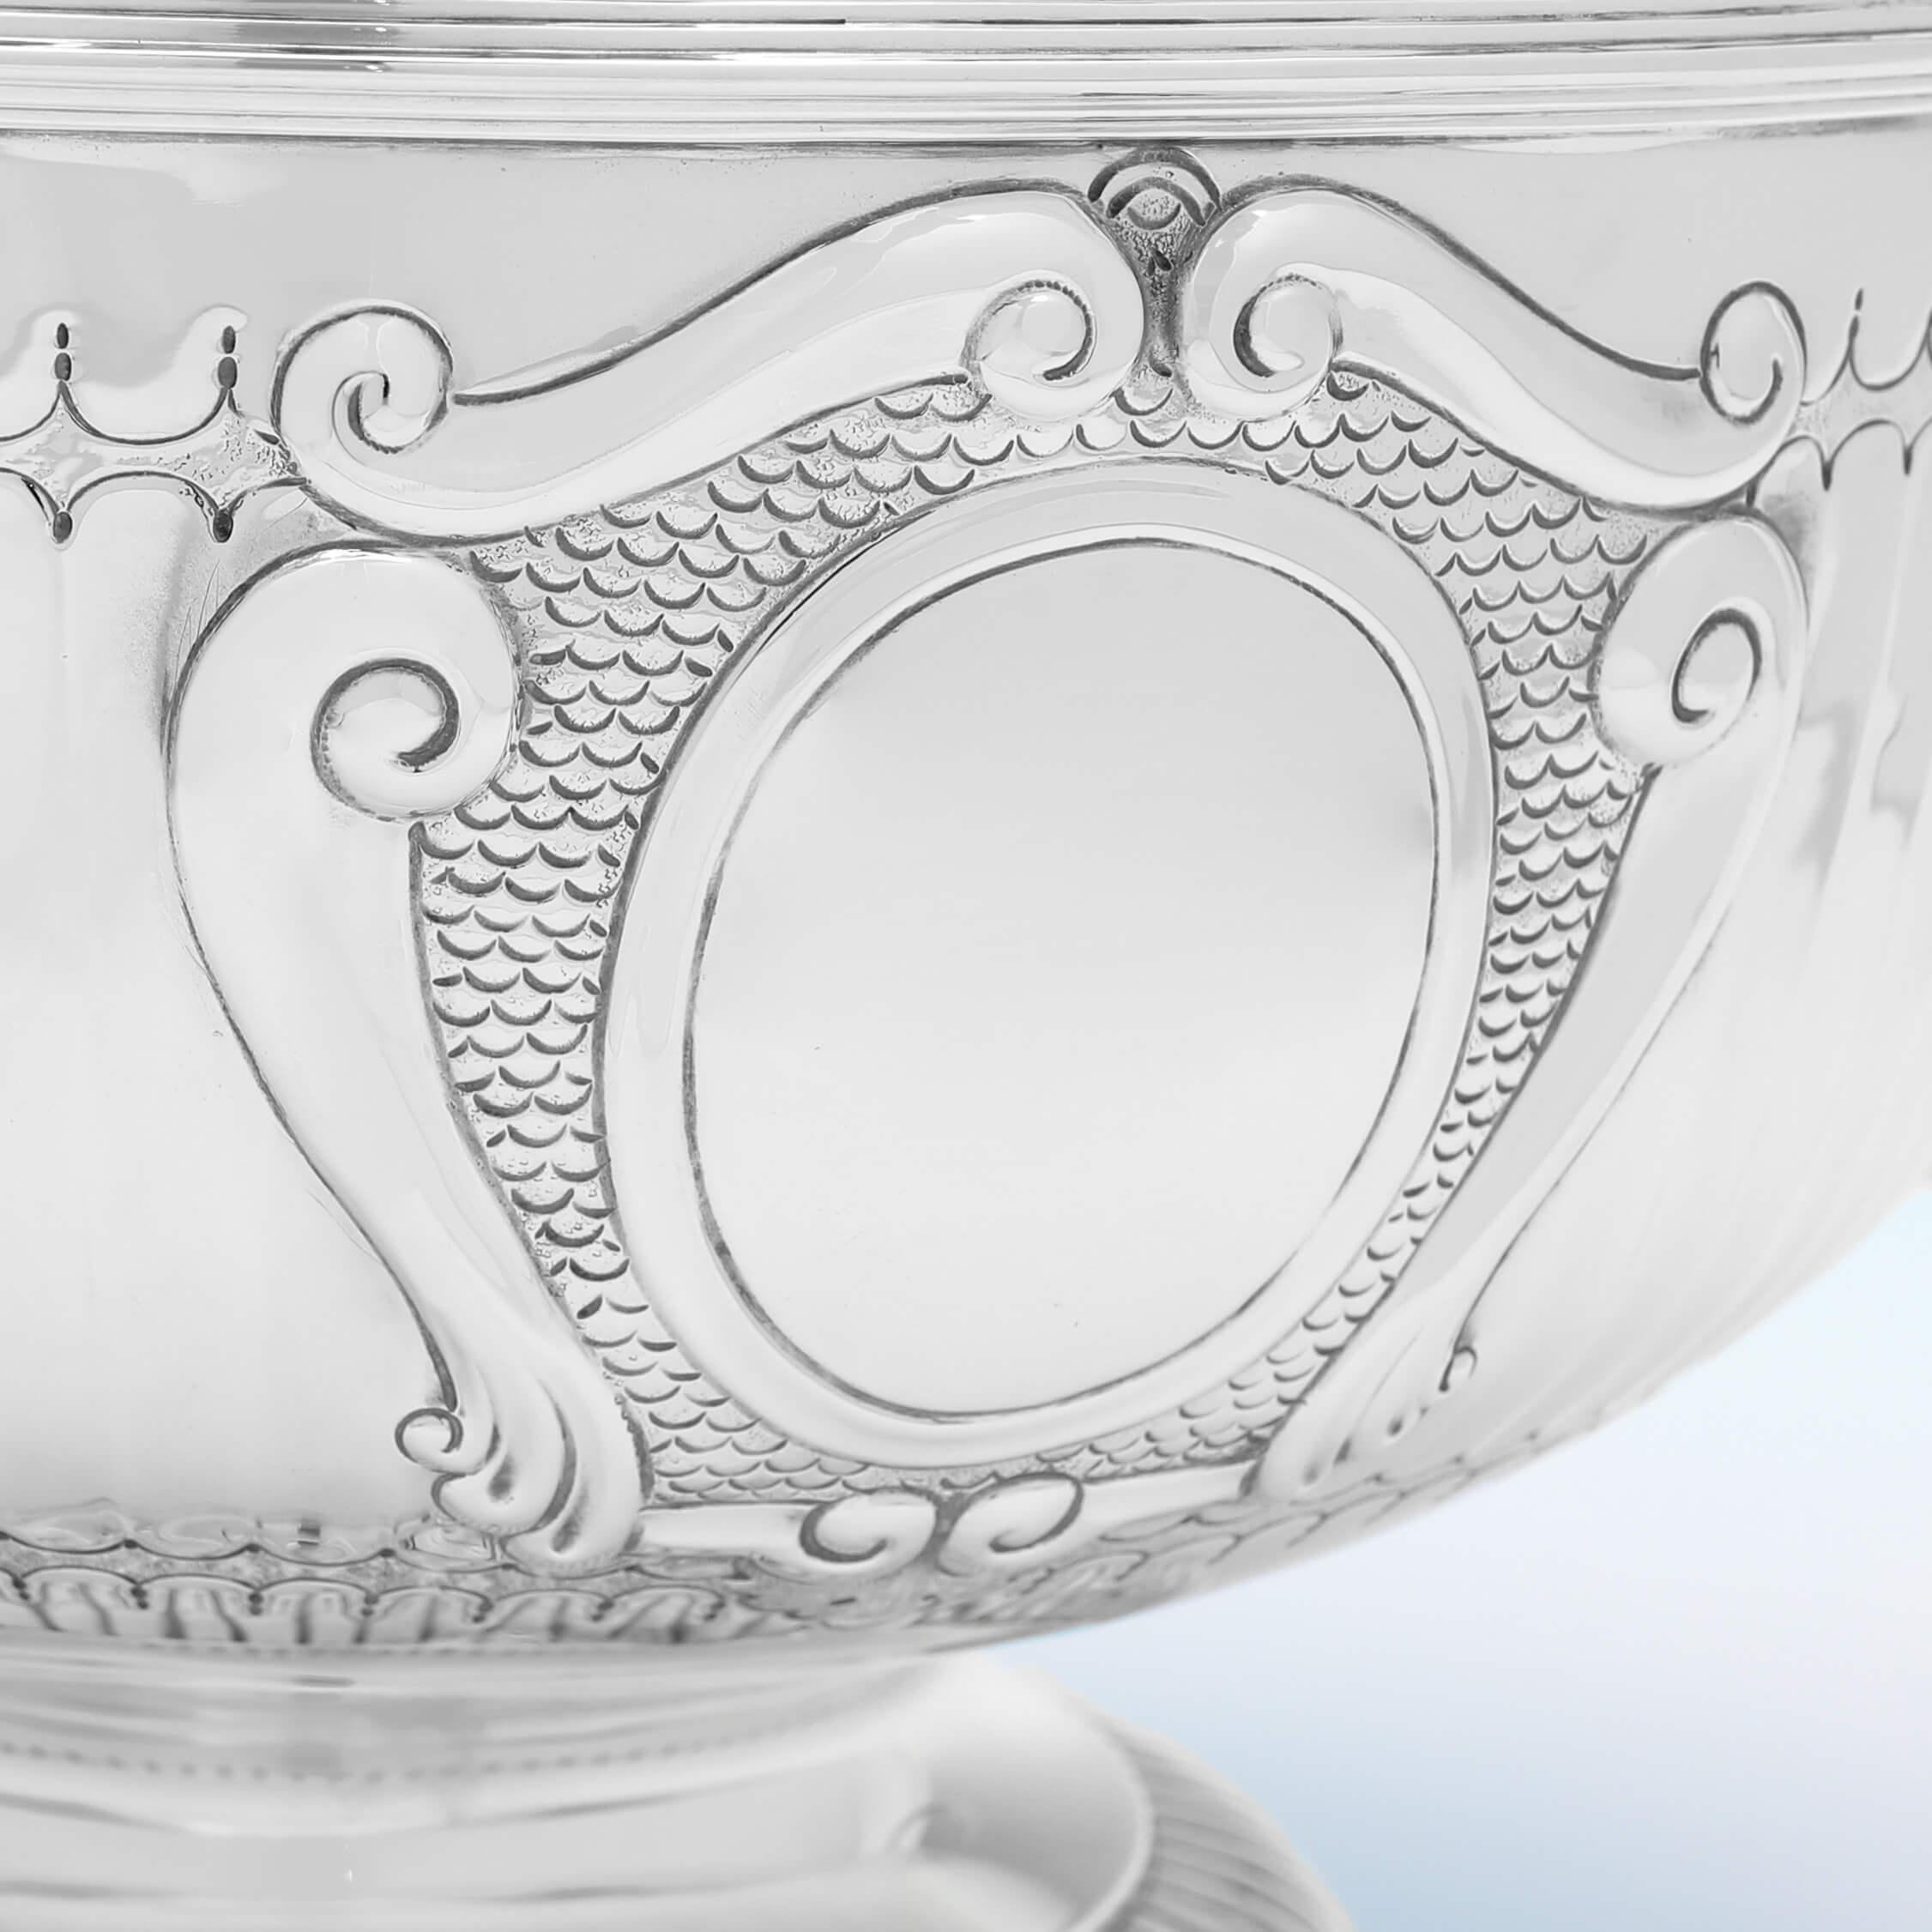 Antique Sterling Silver Montieth Bowl - Chester 1911 - Centrepiece Bowl In Good Condition For Sale In London, London